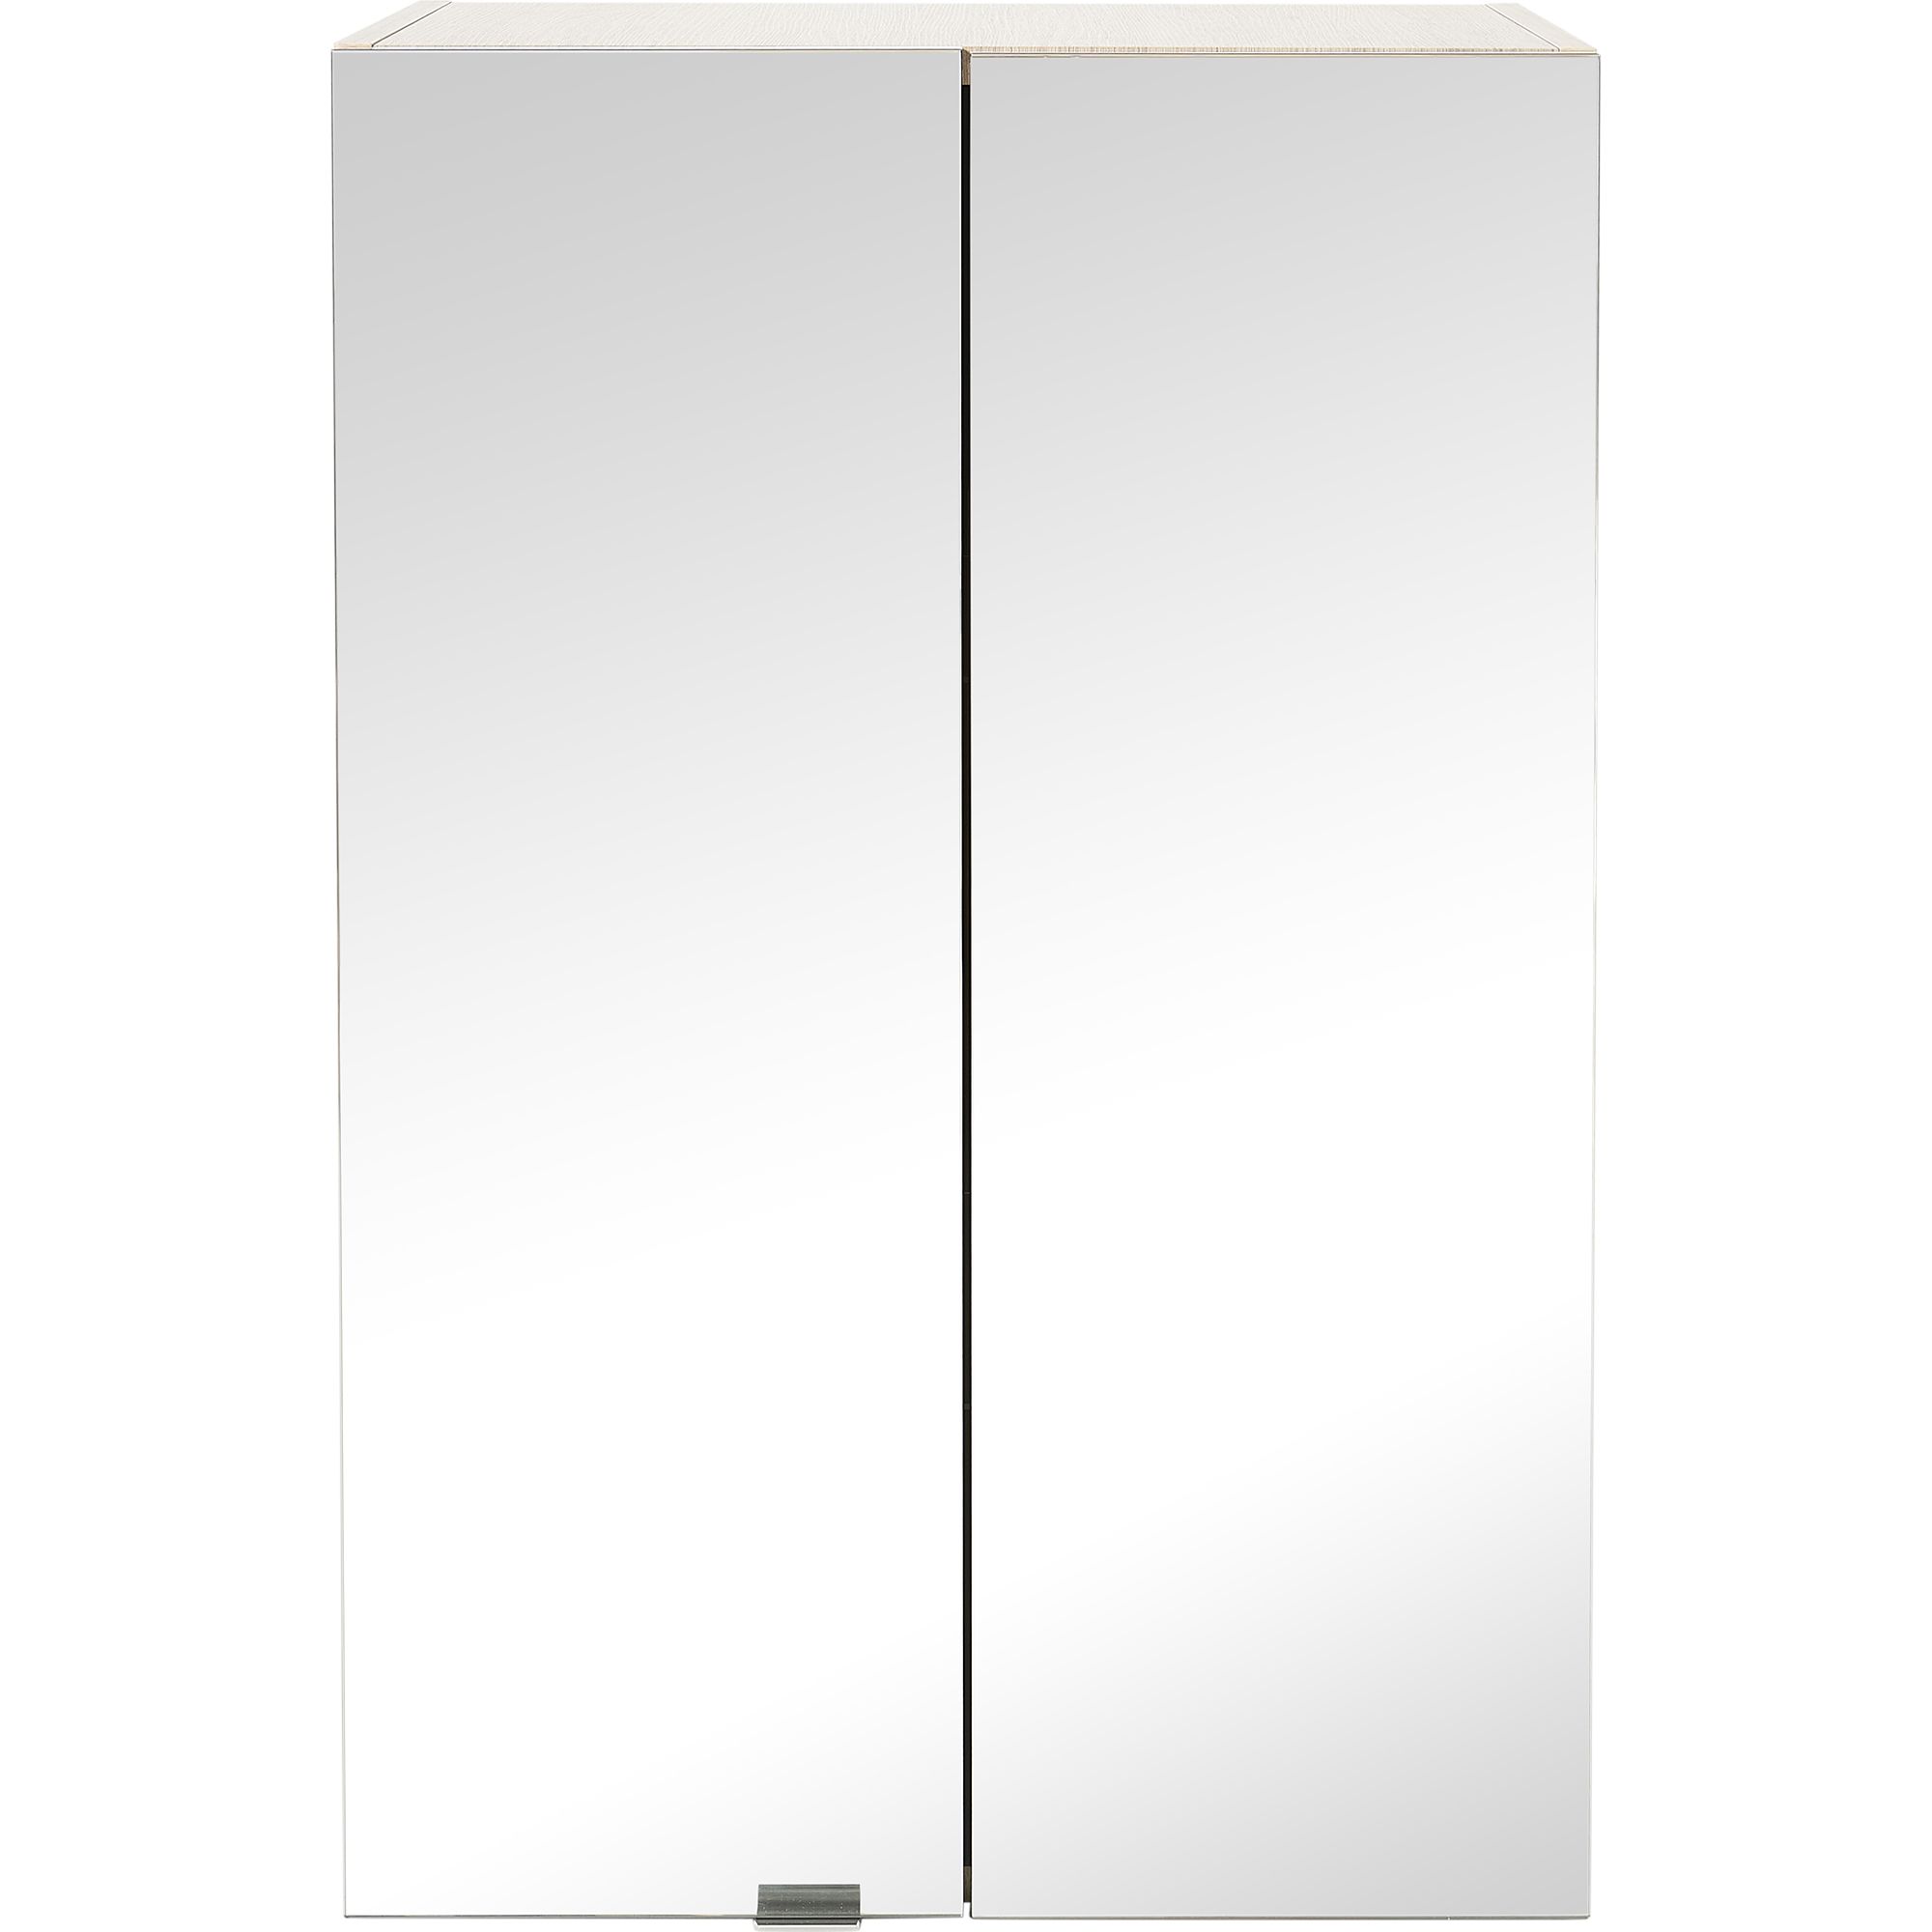 GoodHome Imandra Brown Wall-mounted Mirrored Bathroom Cabinet (W)600mm (H)900mm